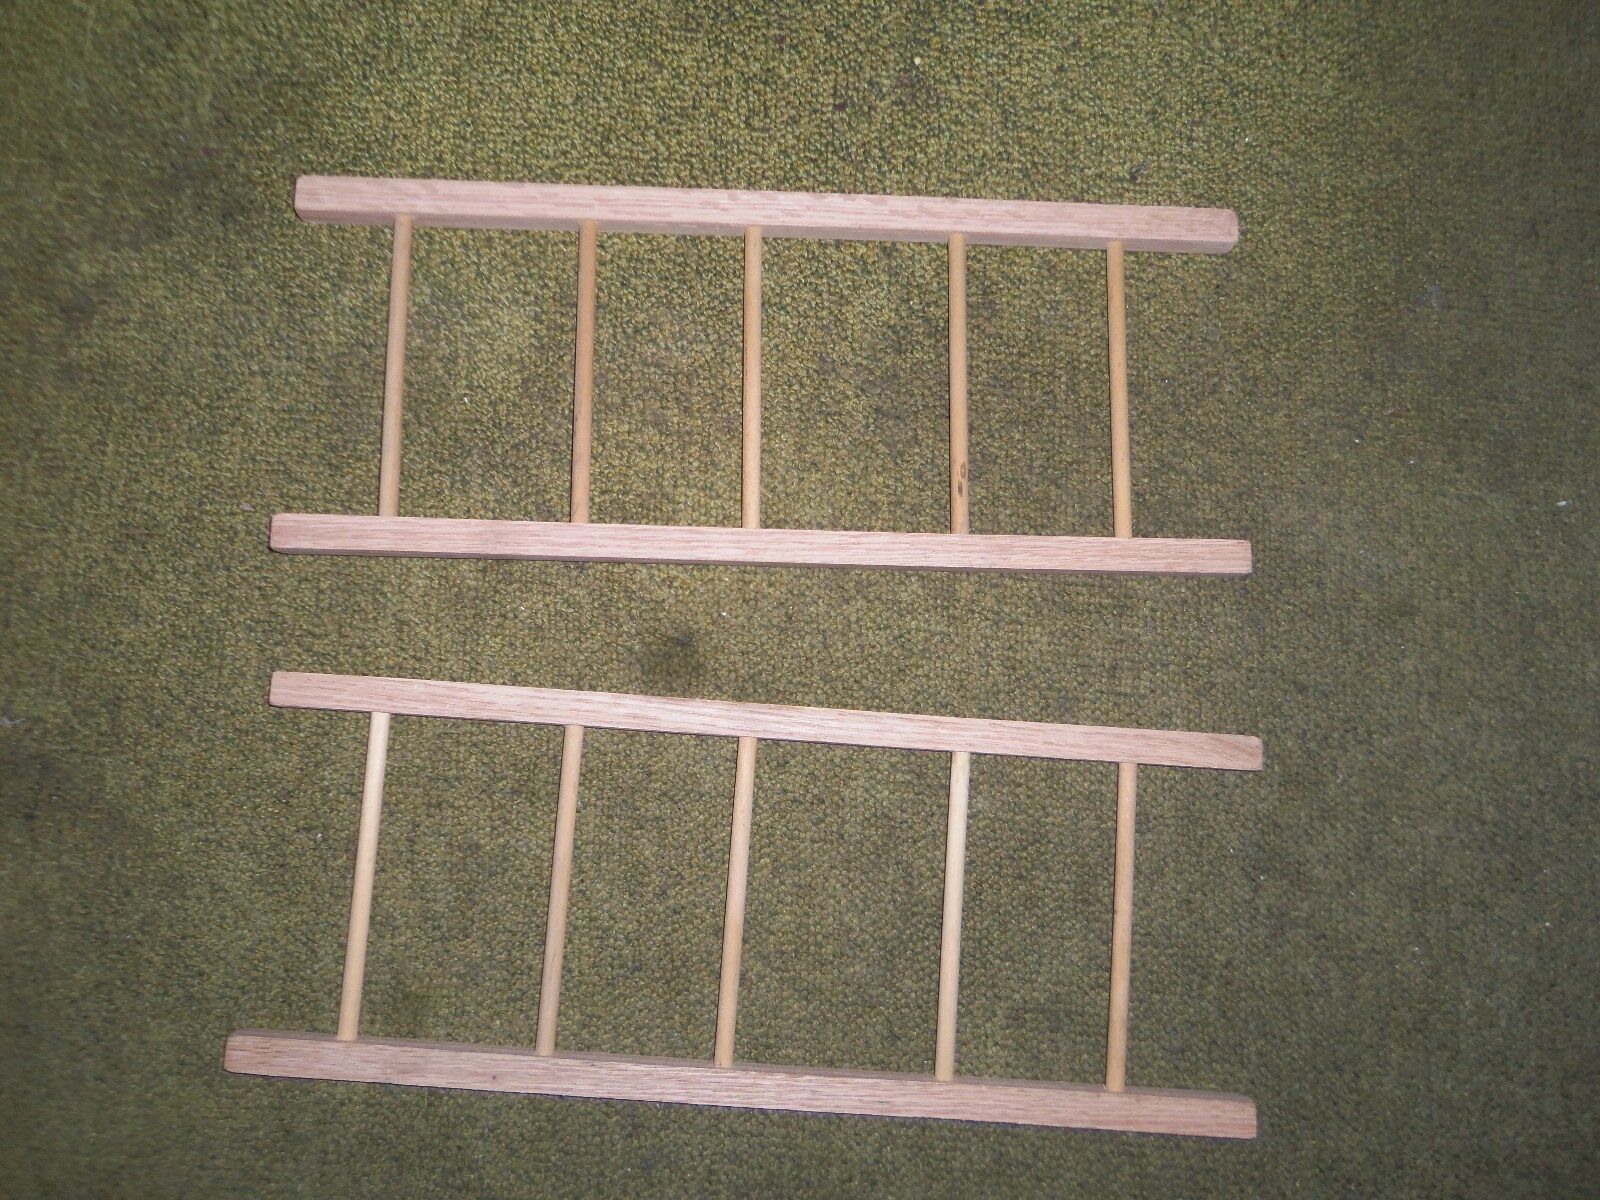 AMF pedal car wood ladders for 508 fire truck &other brands